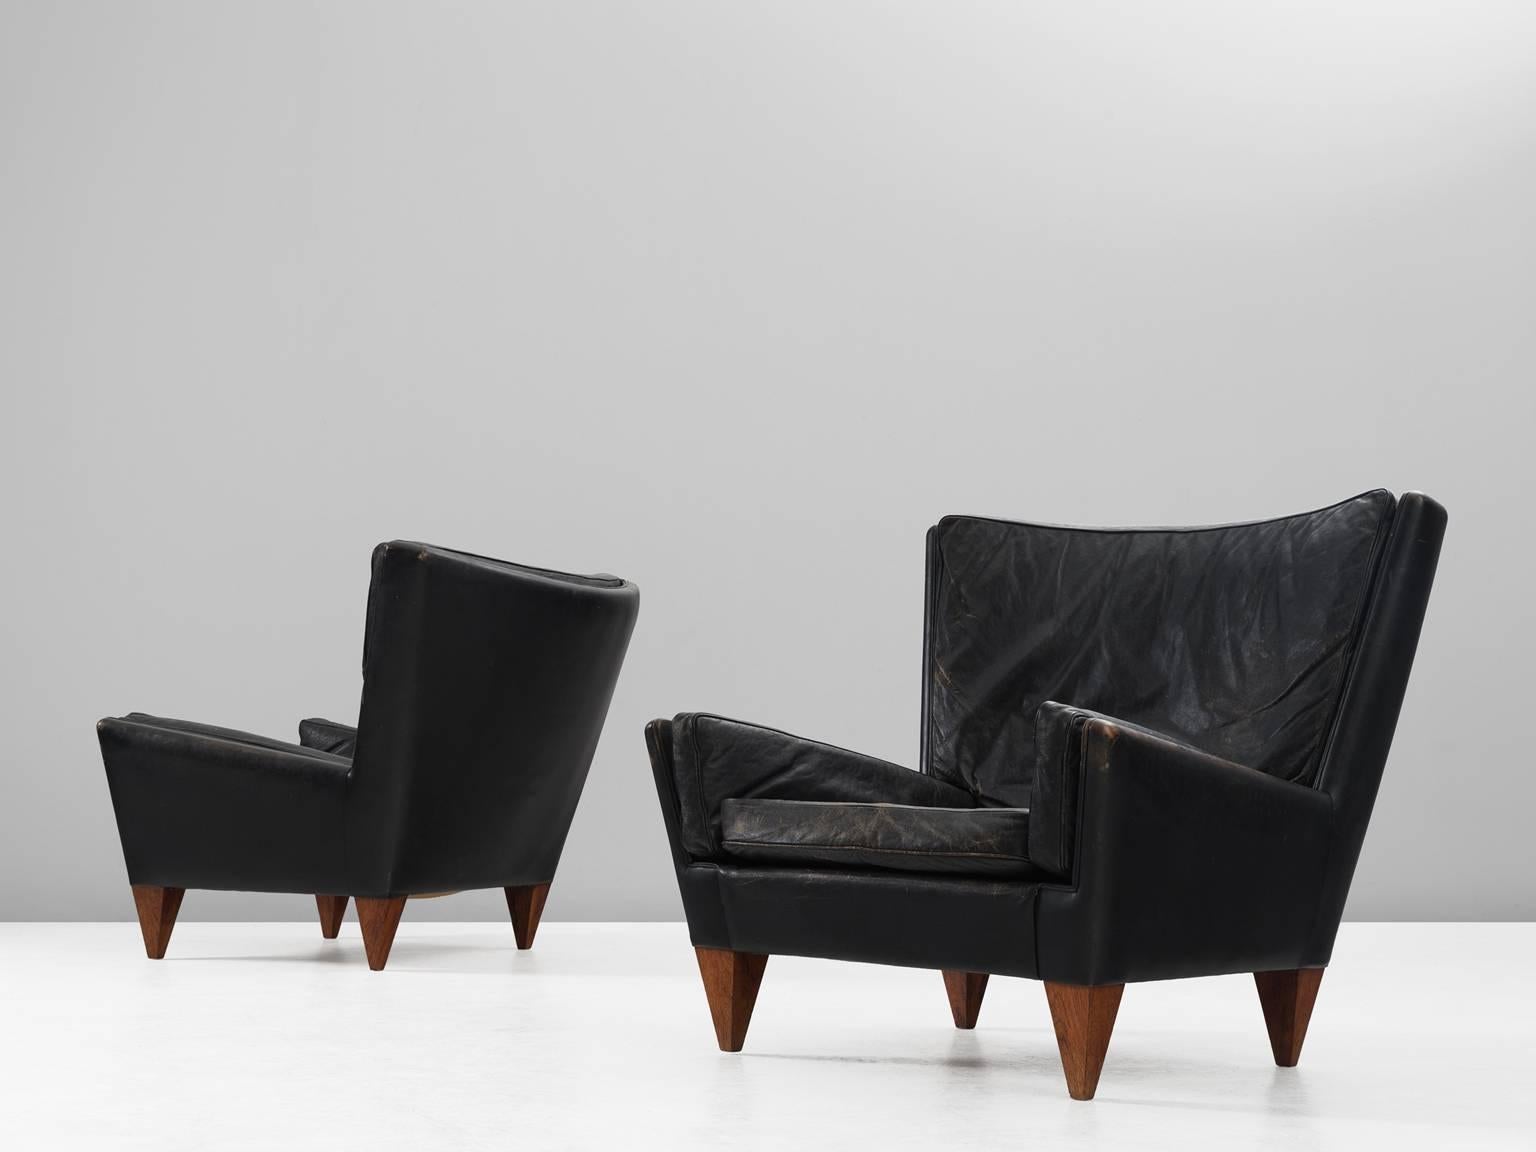 Two easy chairs model V11 'Pyramid,' in rosewood and leather, by Illum Wikkelsø for Holger Christiansen, Denmark, 1960s. 

Set of two lounge chairs in patinated black leather. This lounge chair was named after the pyramid shaped legs. The rosewood